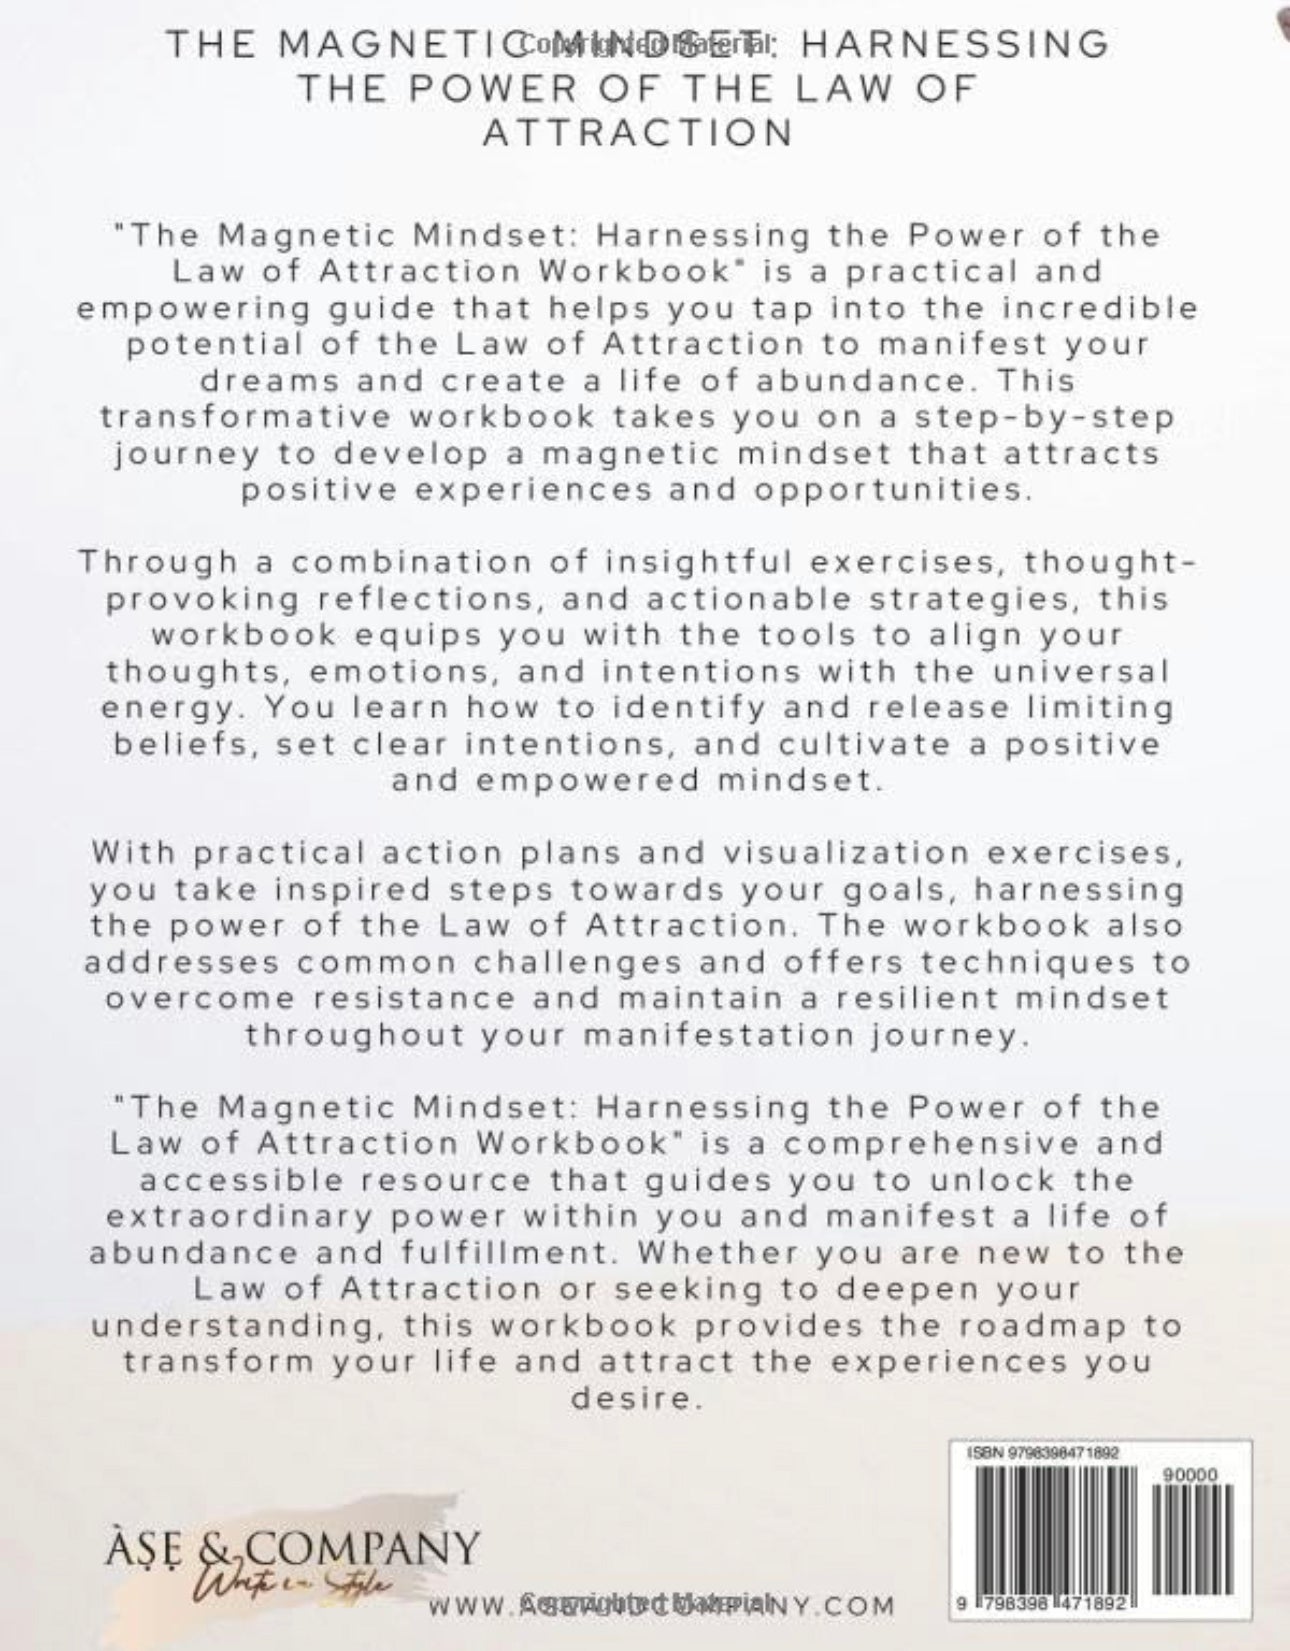 The Magnetic Mindset: Harnessing the Power of the Law of Attraction